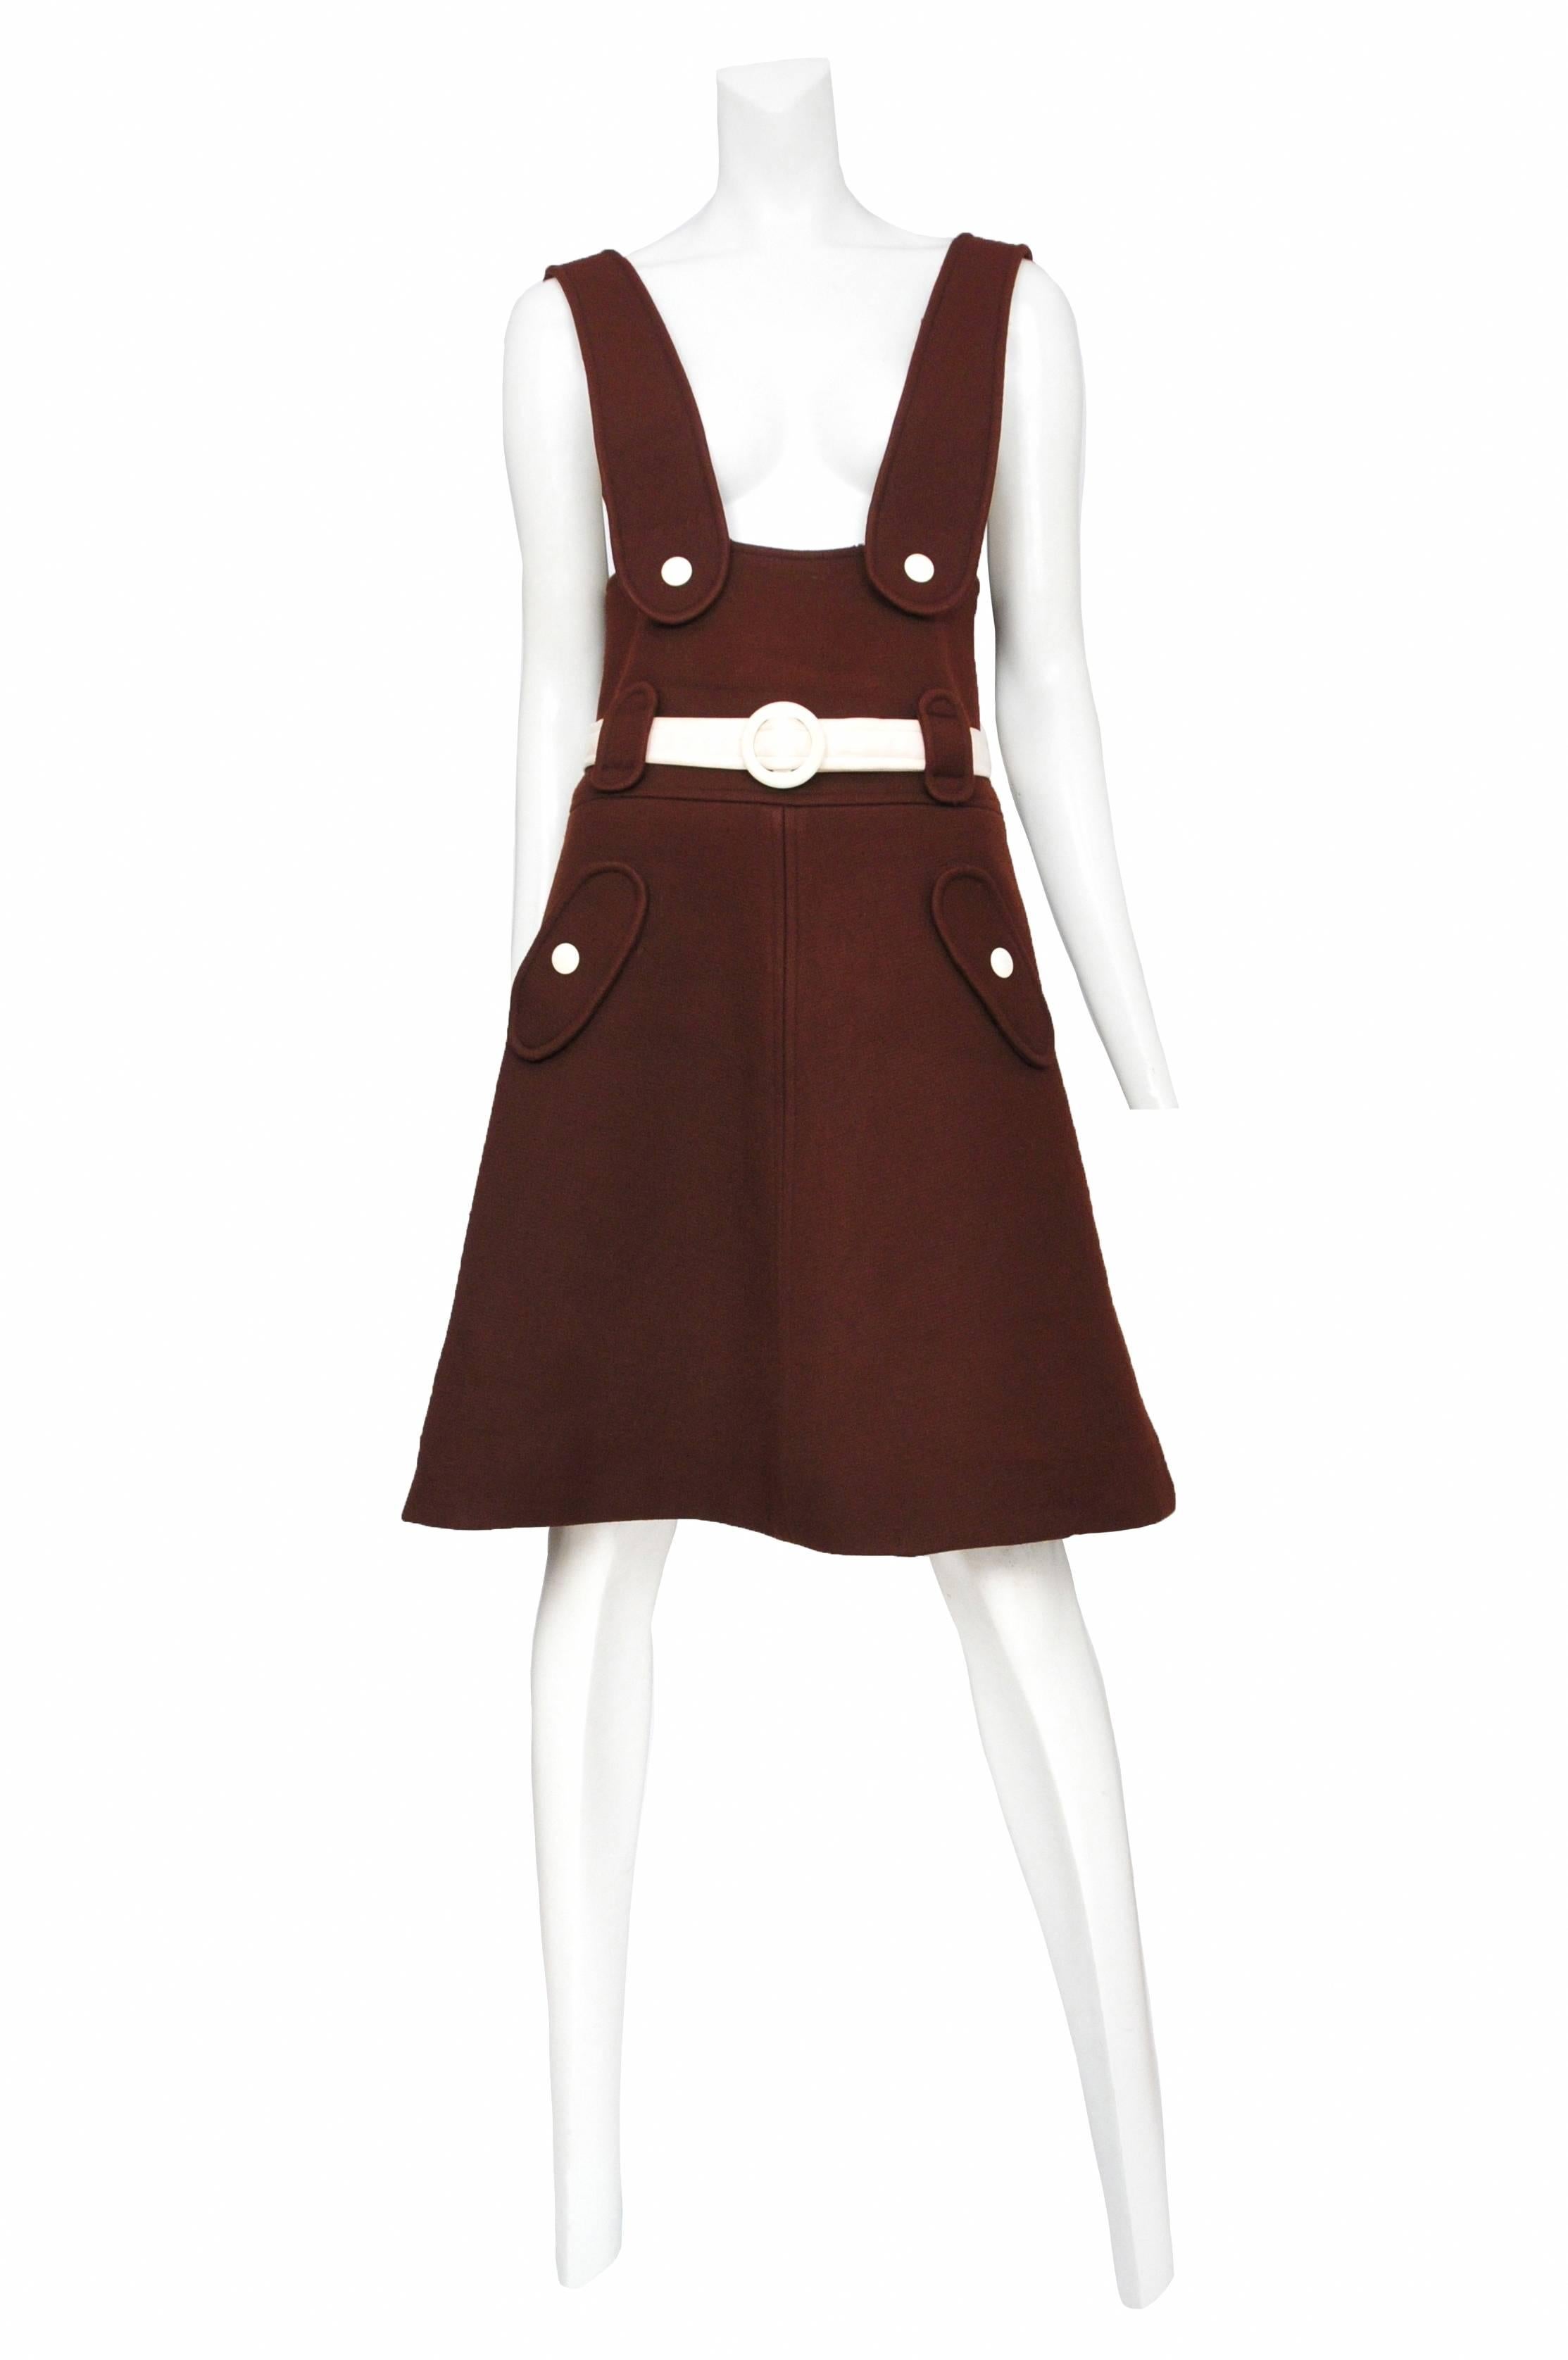 Vintage Andre Courreges 1960's chocolate brown wool space-age jumper. A-line constructed skirt with side snap pockets and belted waist. The jumper features contrast white snap buttons and belt.